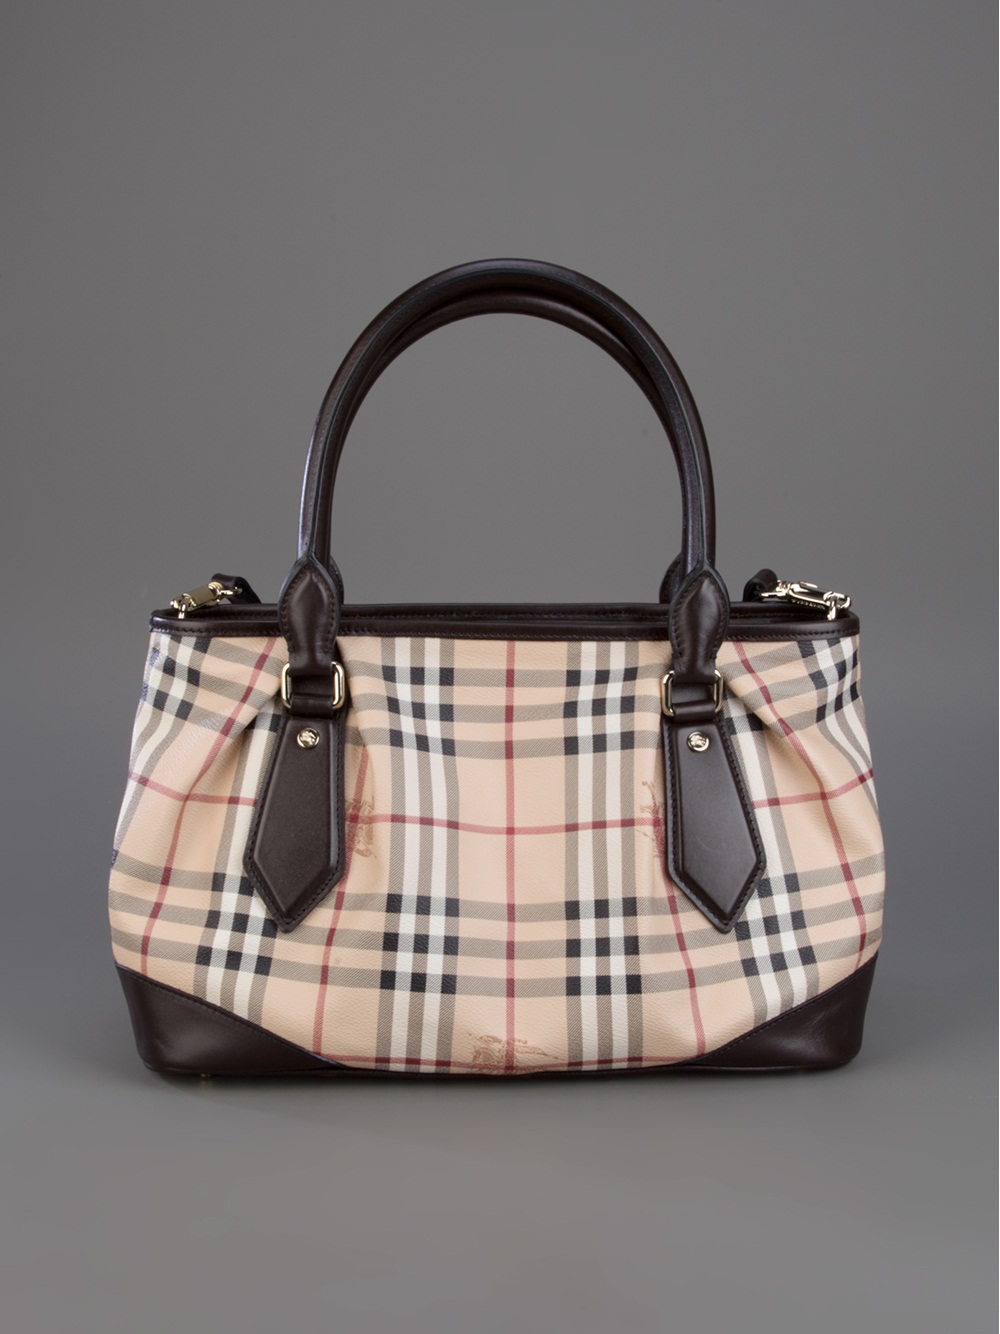 Lyst - Burberry Tote Bag in Natural